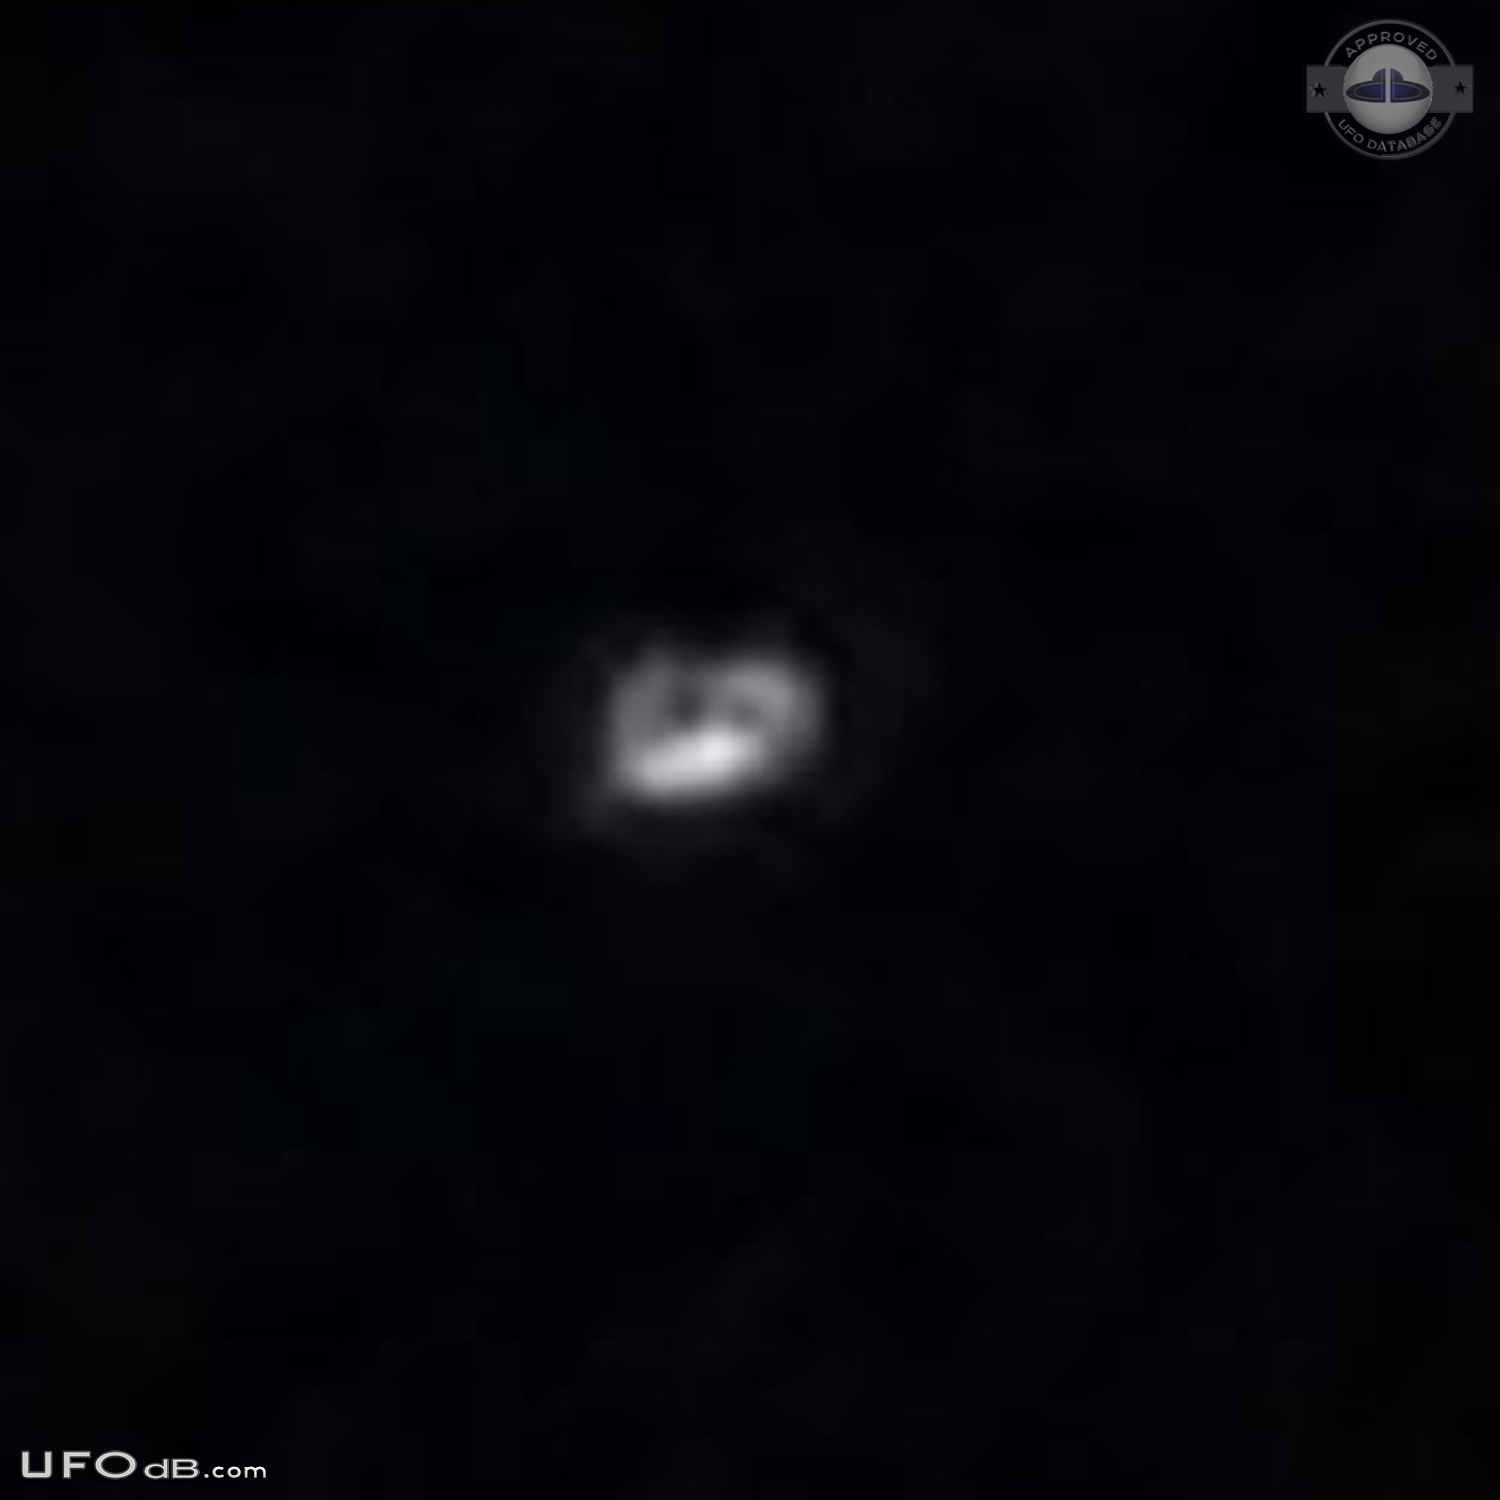 UFO with tentacles with reddish color seen over Magee, Mississipi 2014 UFO Picture #561-2